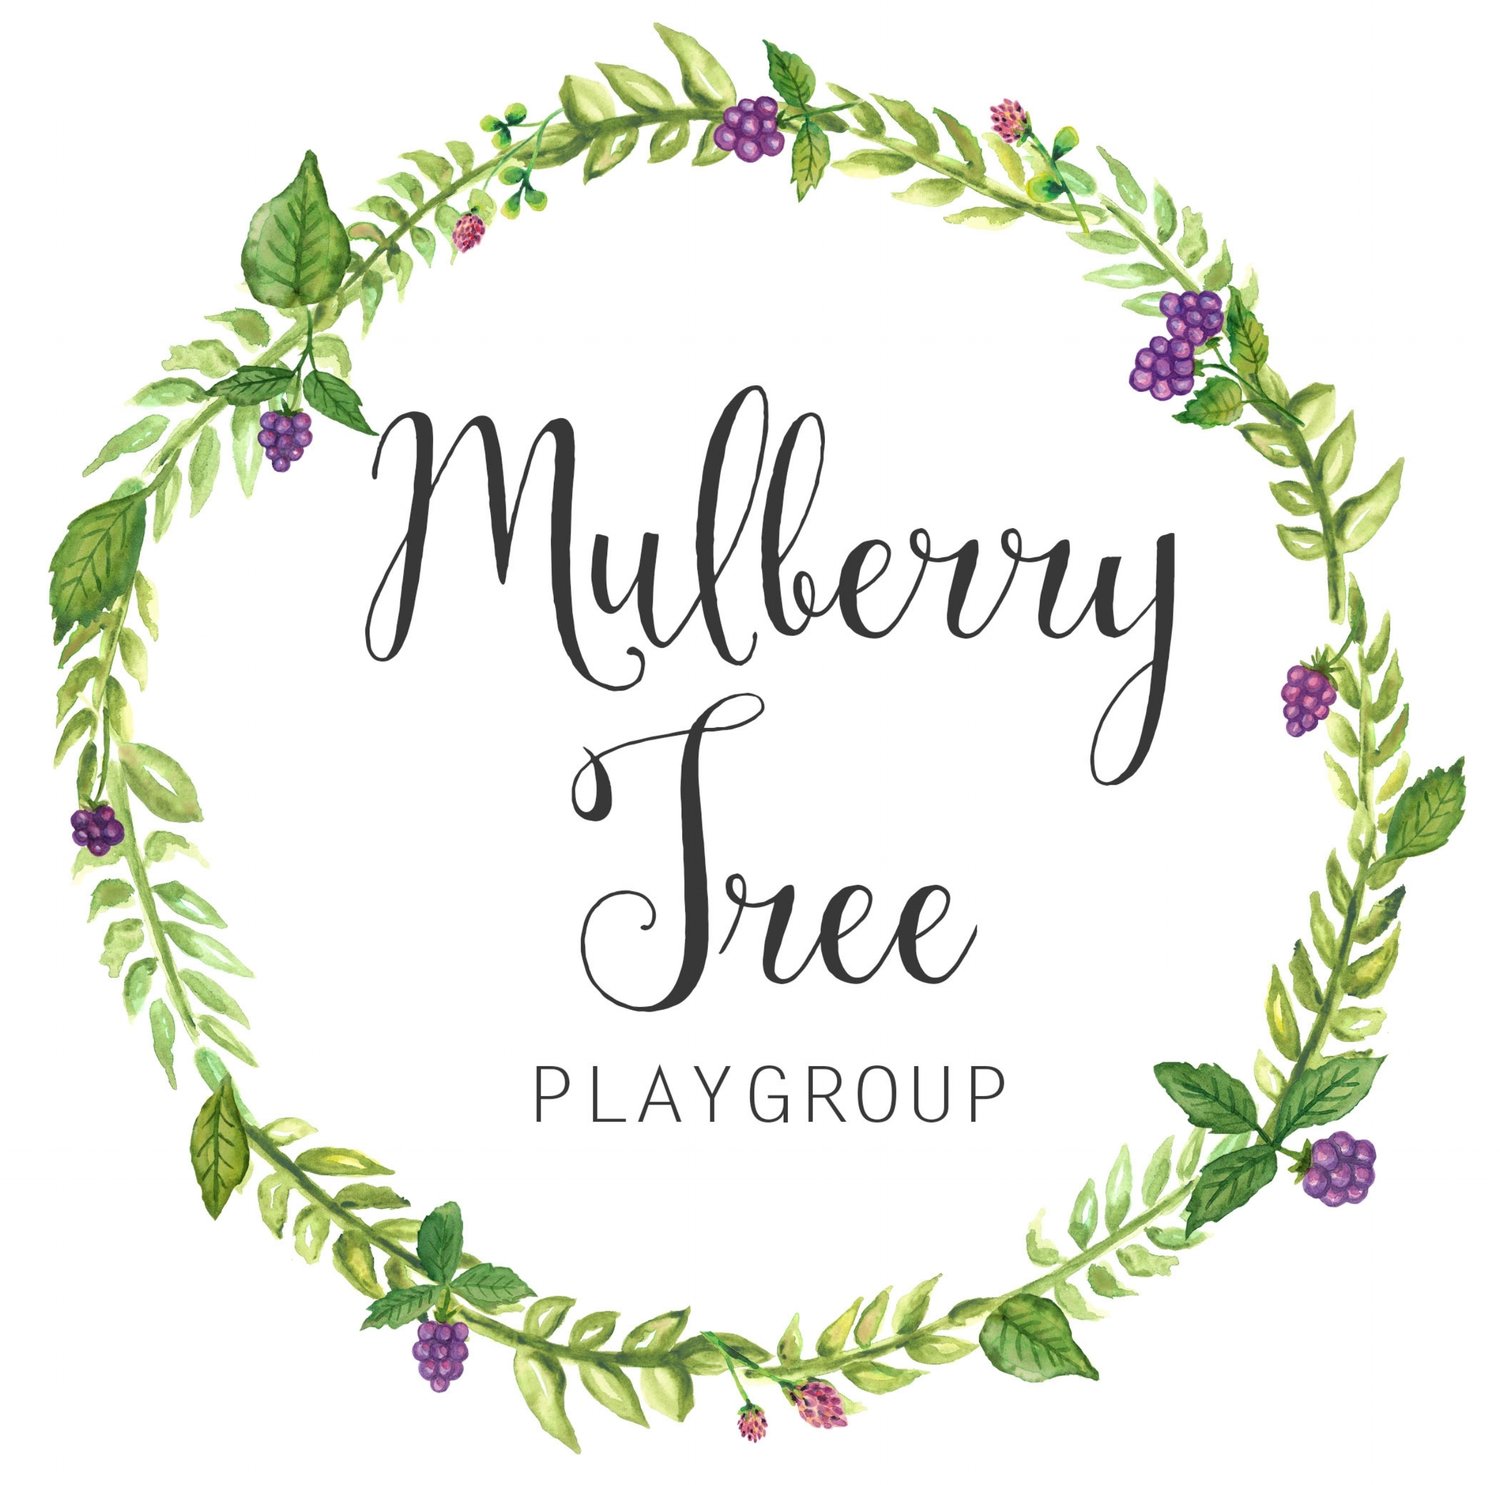 Mulberry Tree Playgroup